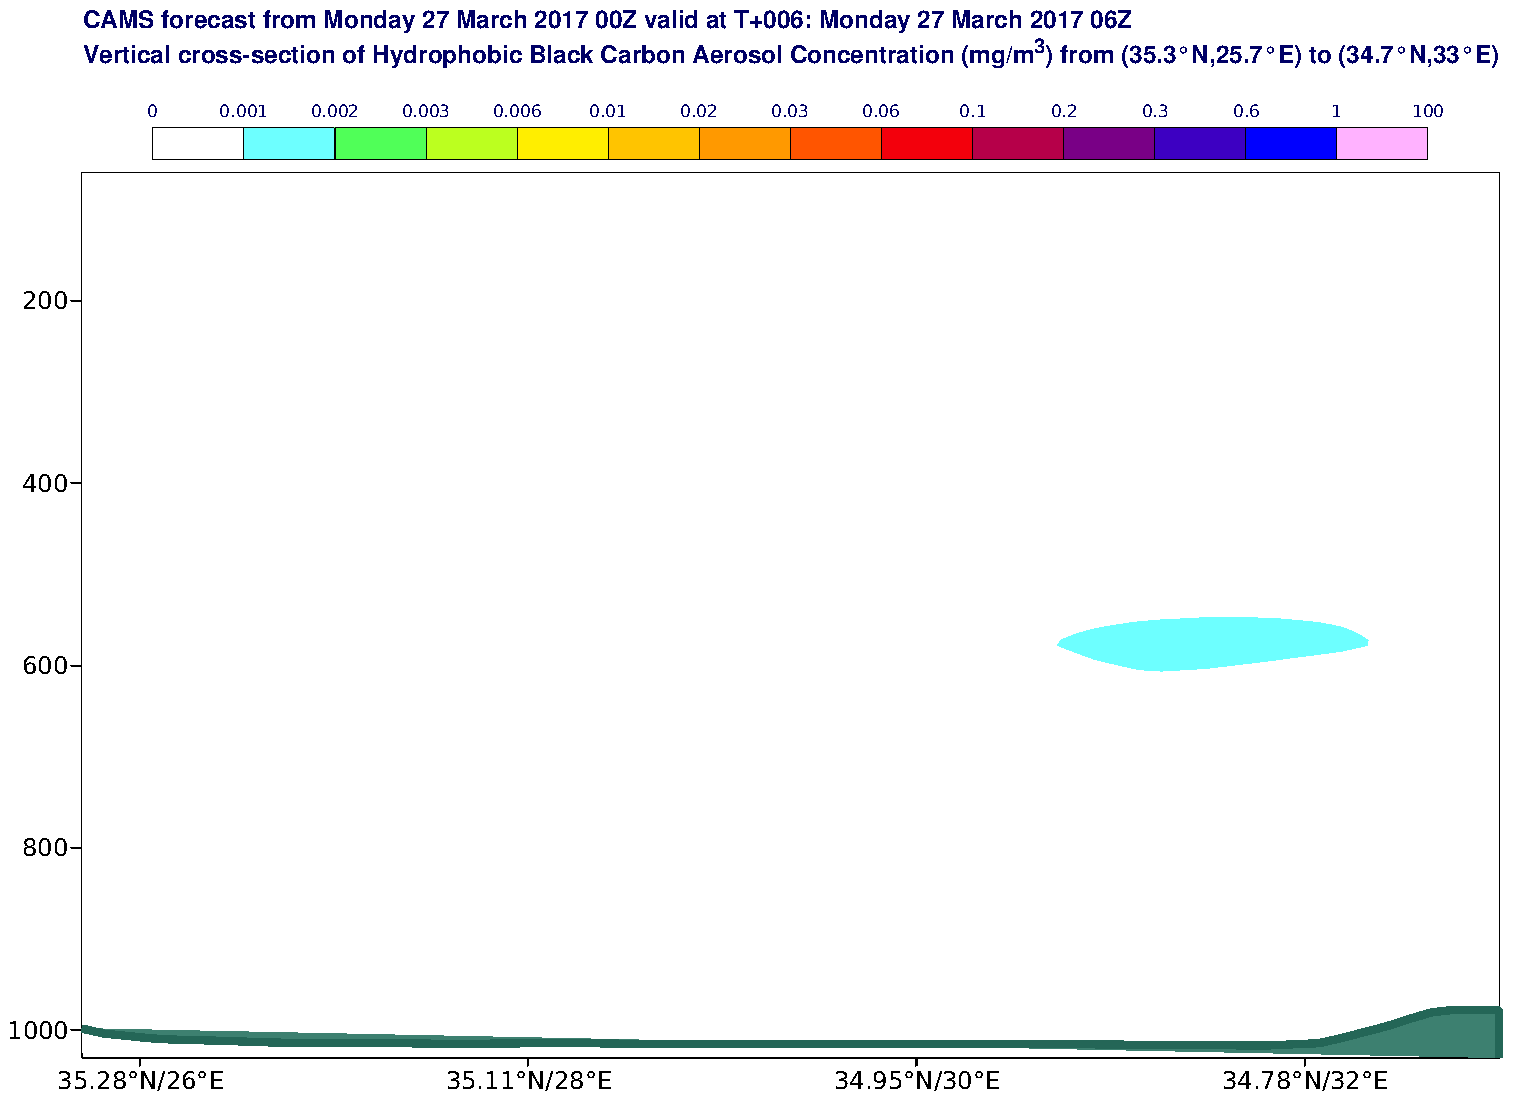 Vertical cross-section of Hydrophobic Black Carbon Aerosol Concentration (mg/m3) valid at T6 - 2017-03-27 06:00